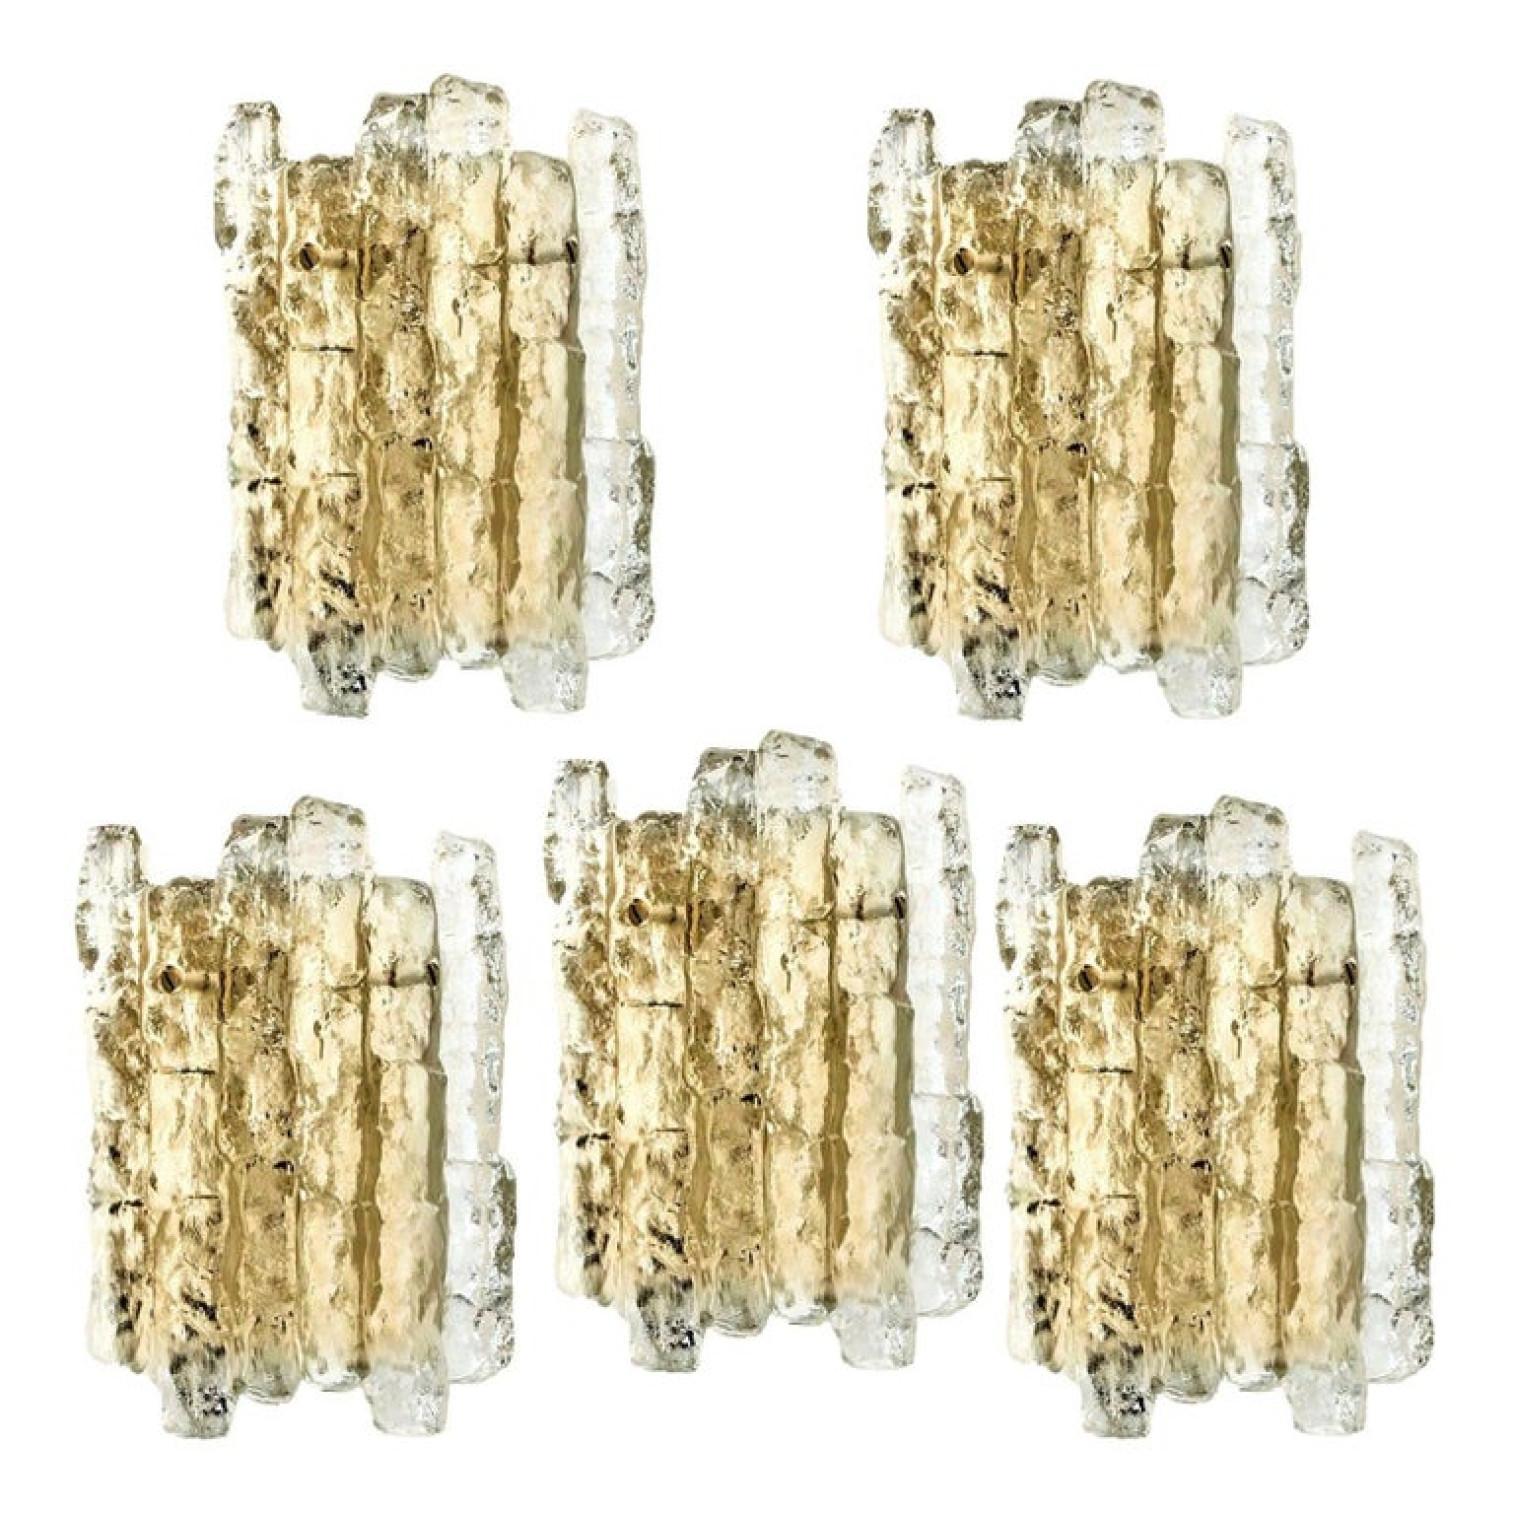 One of the ten beautiful and elegant modern brass wall lights or sconces, manufactured by J.T. Kalmar Austria in the 1970s. Lovely design, executed to a very high standard.

Each wall light has two solid ice glass sheets dangling on it. Clean